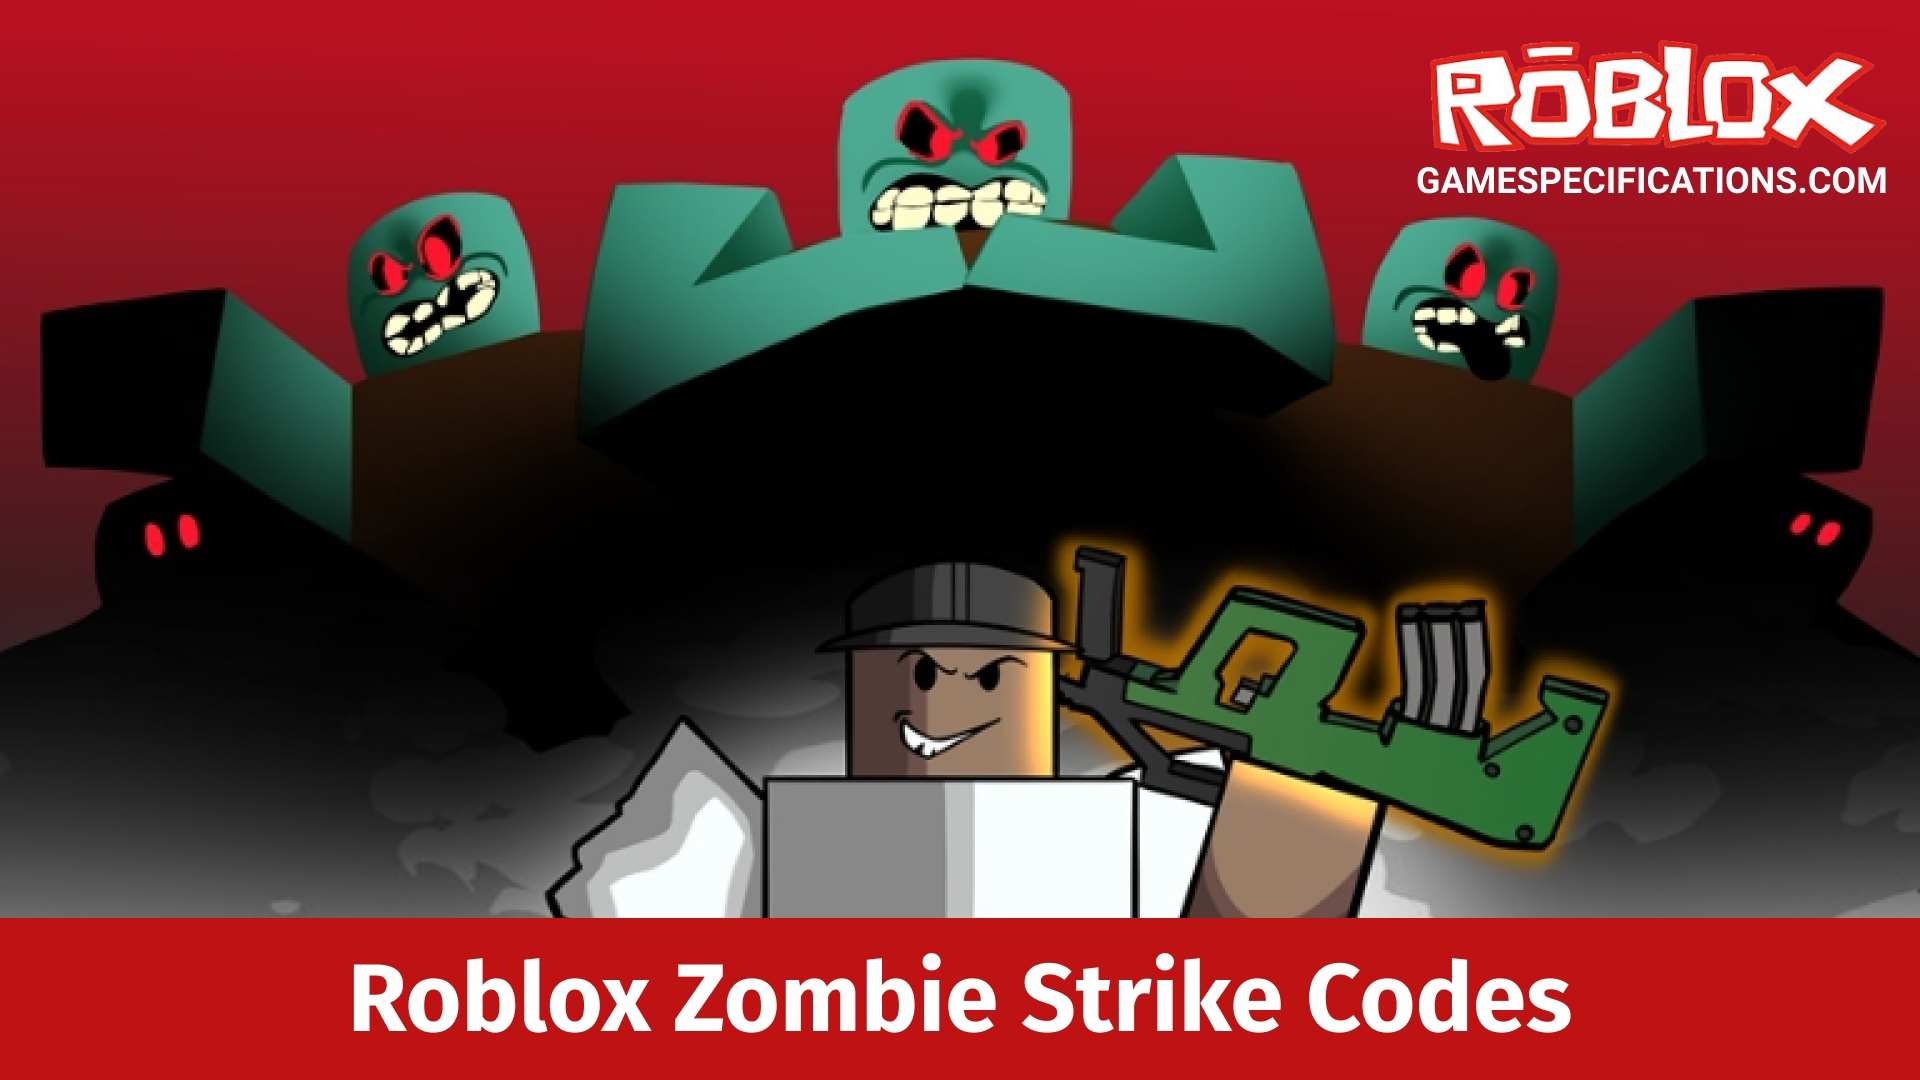 Roblox Zombie Strike Codes July 2021 Game Specifications - roblox gear codes paint bucket